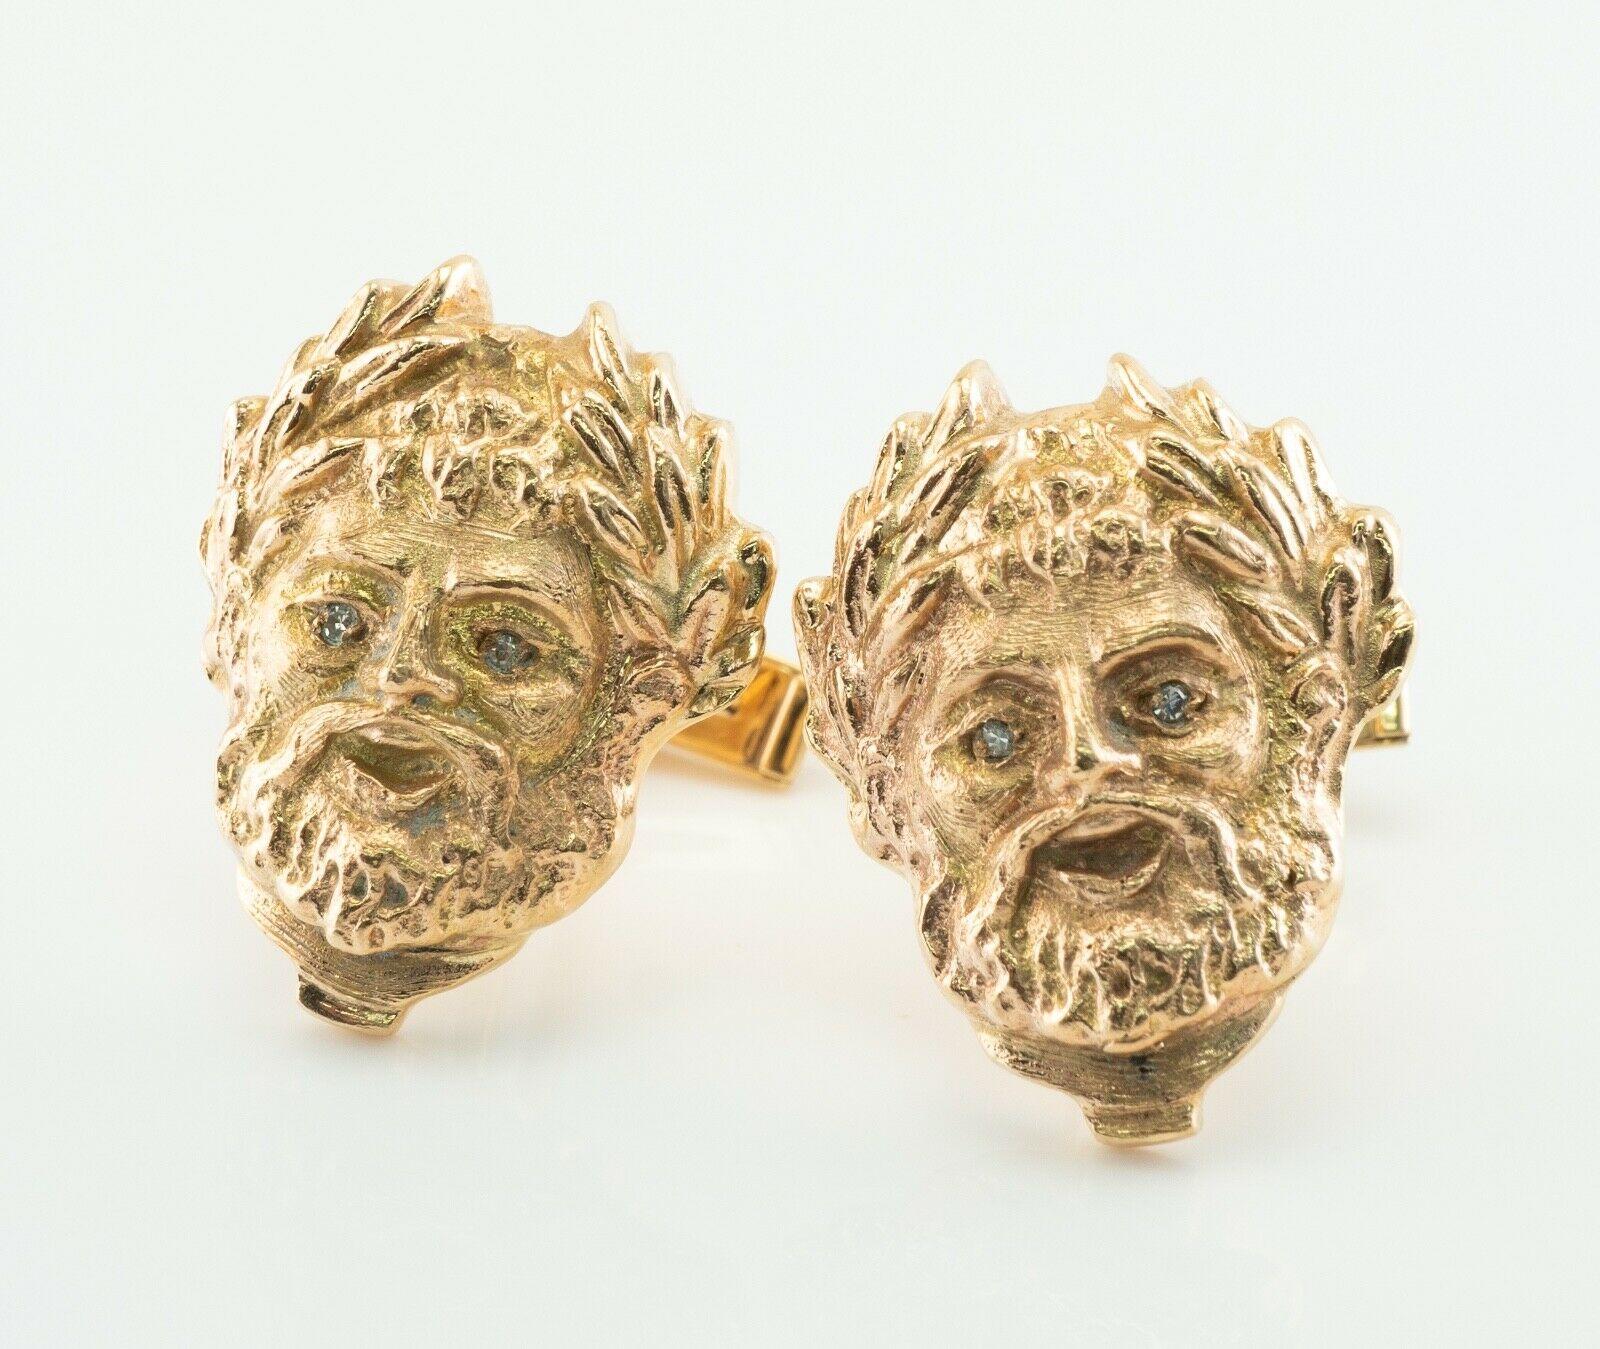 These unique and one of a kind vintage cufflinks are finely crafted in solid 14K Yellow gold (carefully tested and guaranteed) and made in the shape of a man's face. The details of this piece are amazing, it is like a miniature sculpture made of